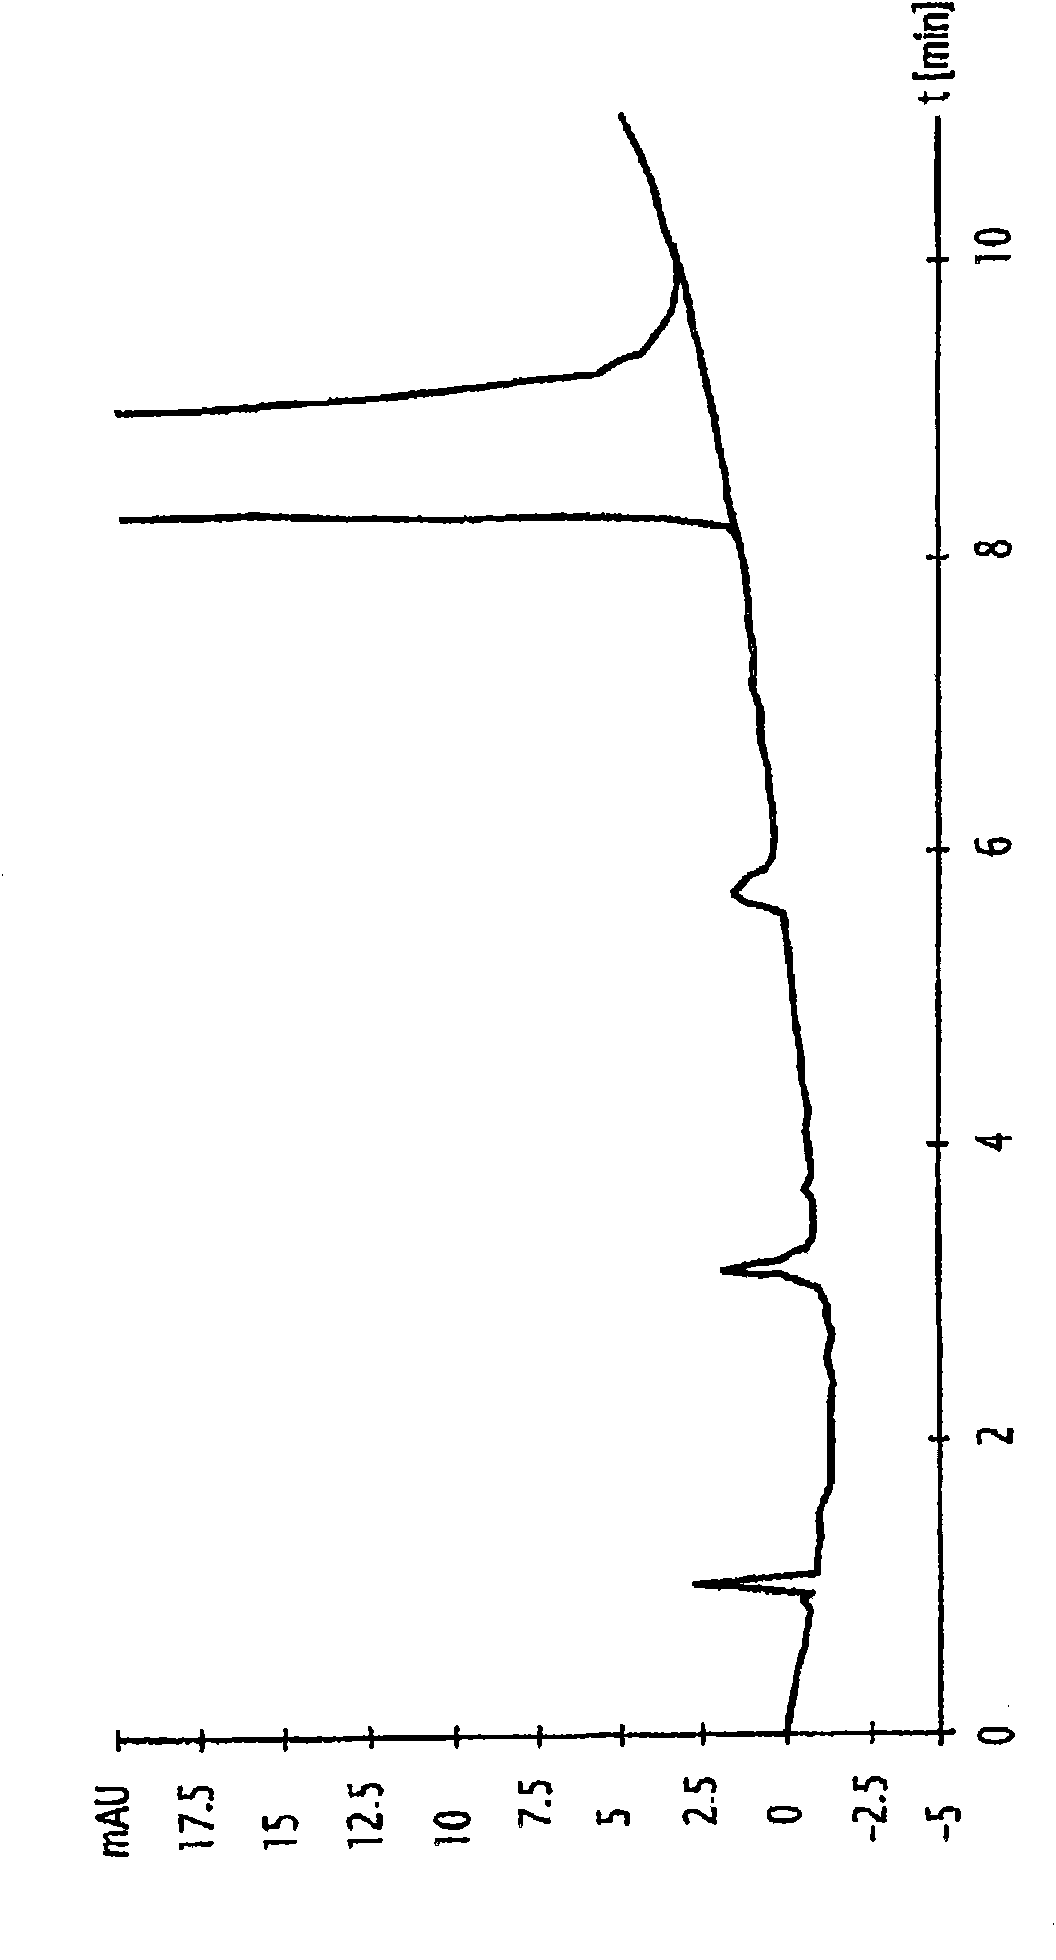 Method for the preparation of morphine compounds